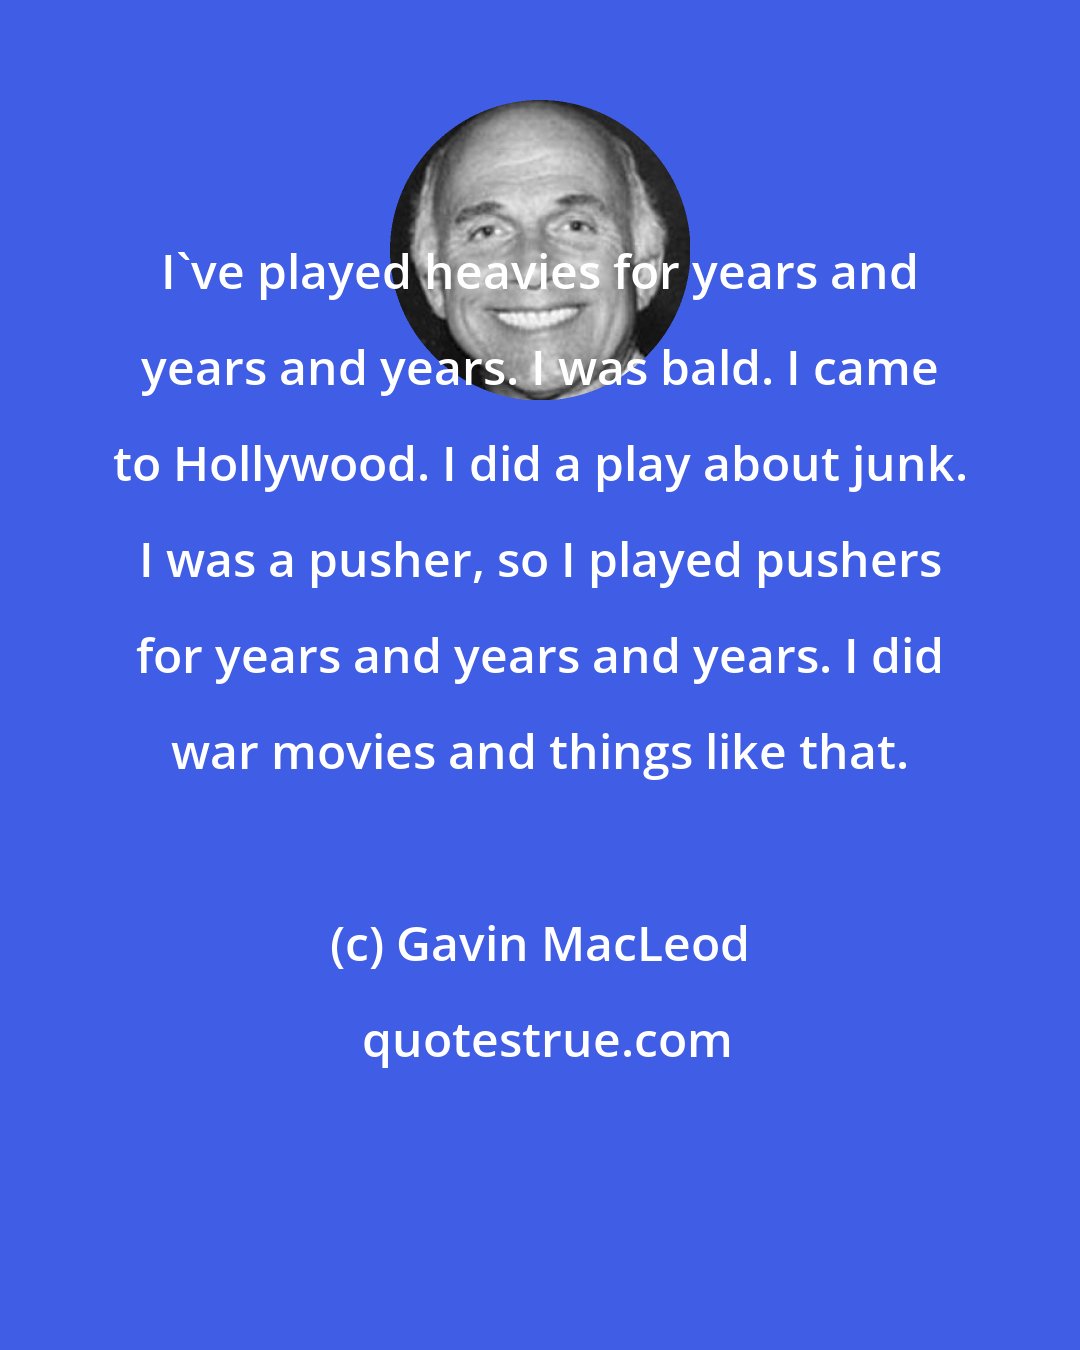 Gavin MacLeod: I've played heavies for years and years and years. I was bald. I came to Hollywood. I did a play about junk. I was a pusher, so I played pushers for years and years and years. I did war movies and things like that.